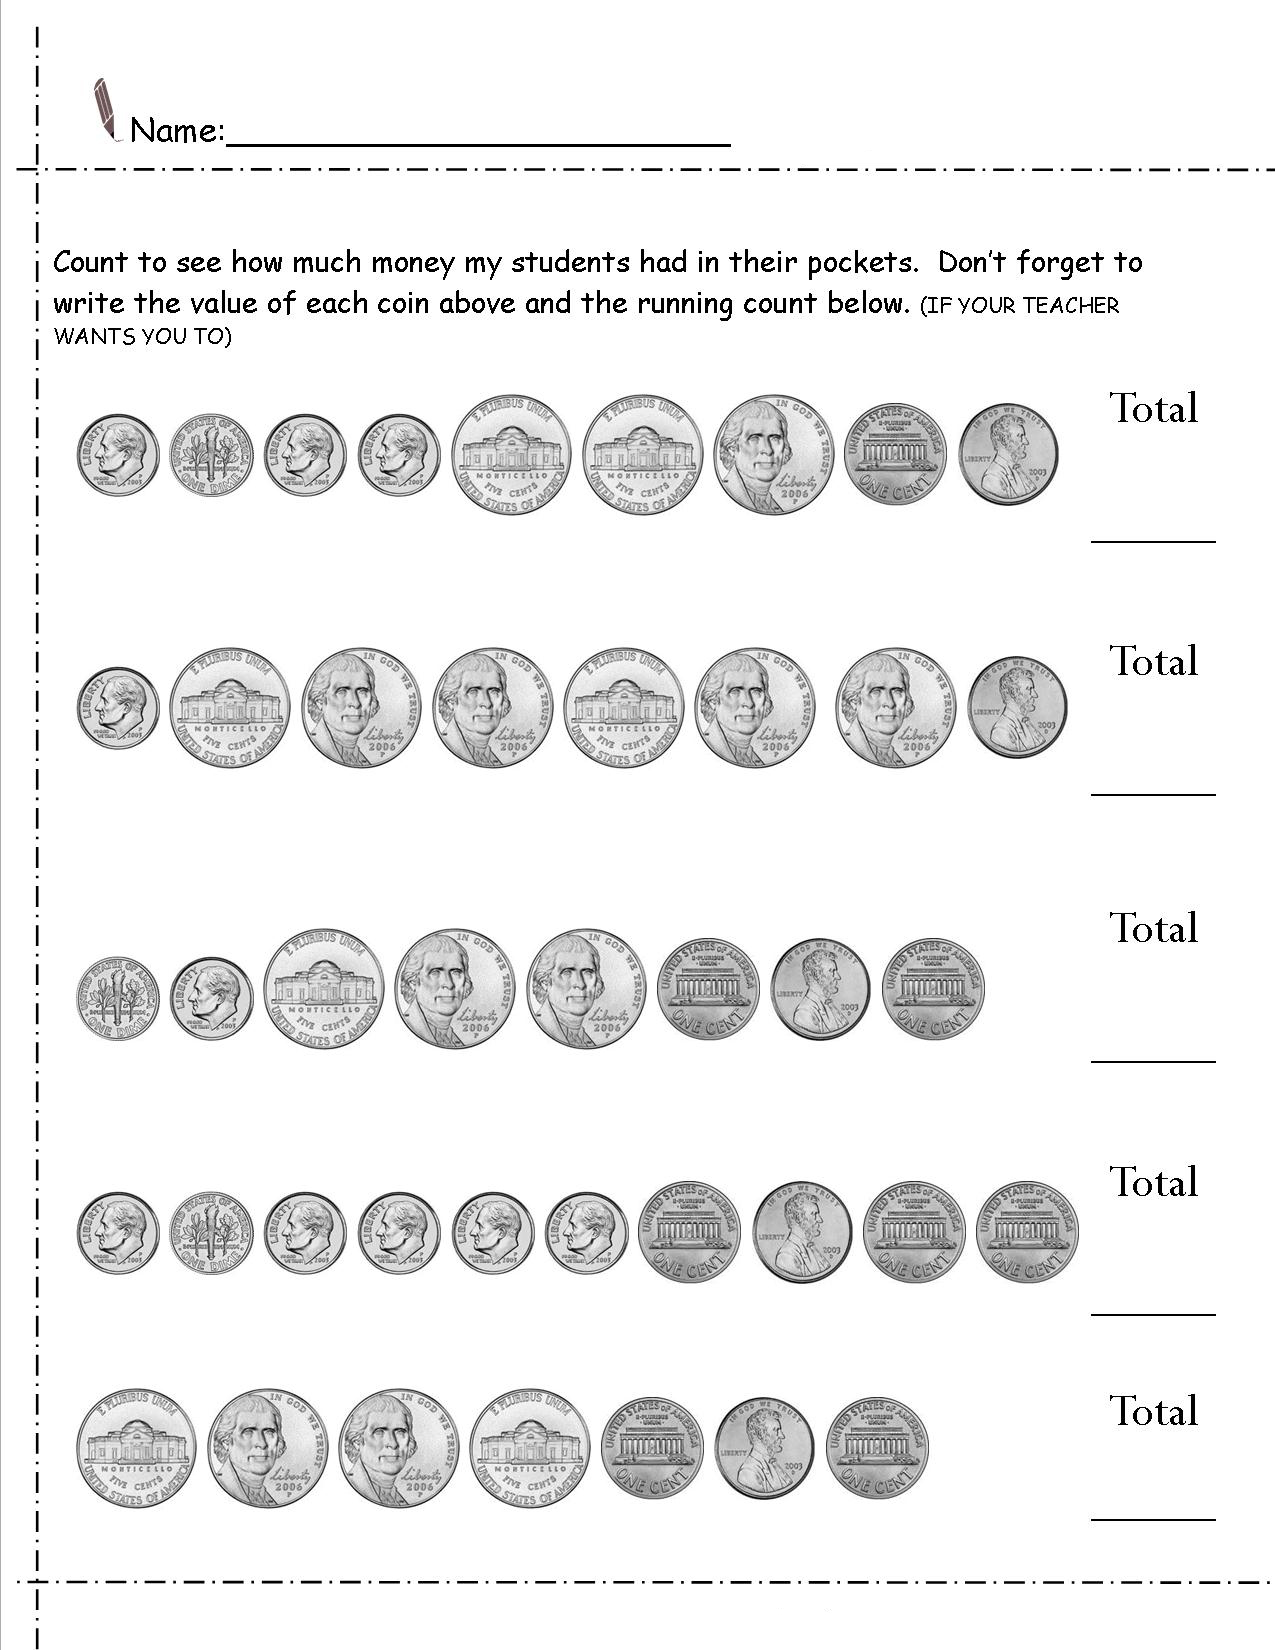 2nd grade money worksheets up to 2 grade 2 counting money worksheets